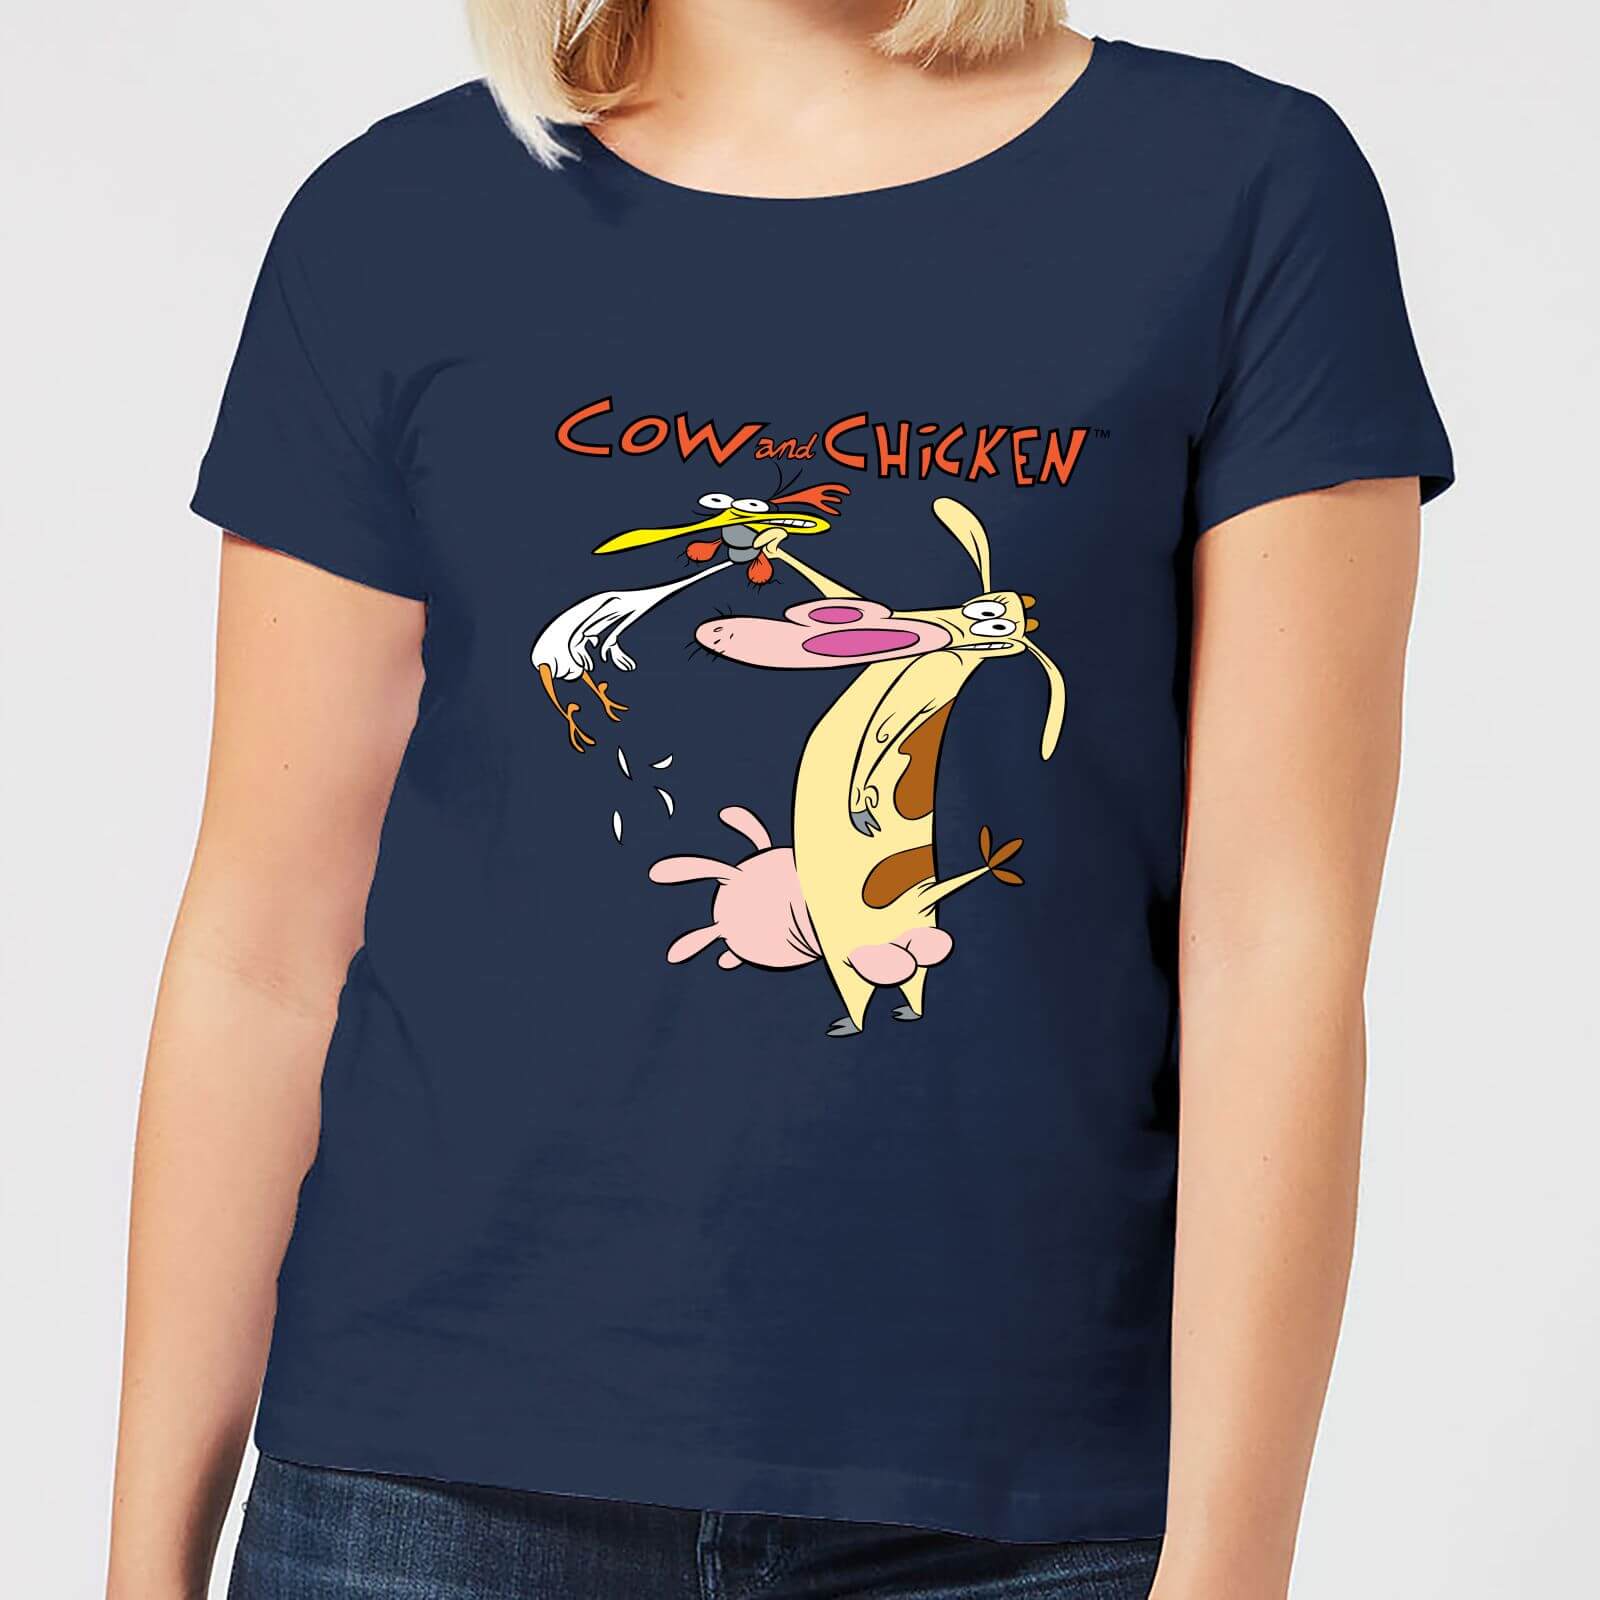 Cartoon Network Cow and Chicken Characters Women's T-Shirt - Navy - XL - Navy